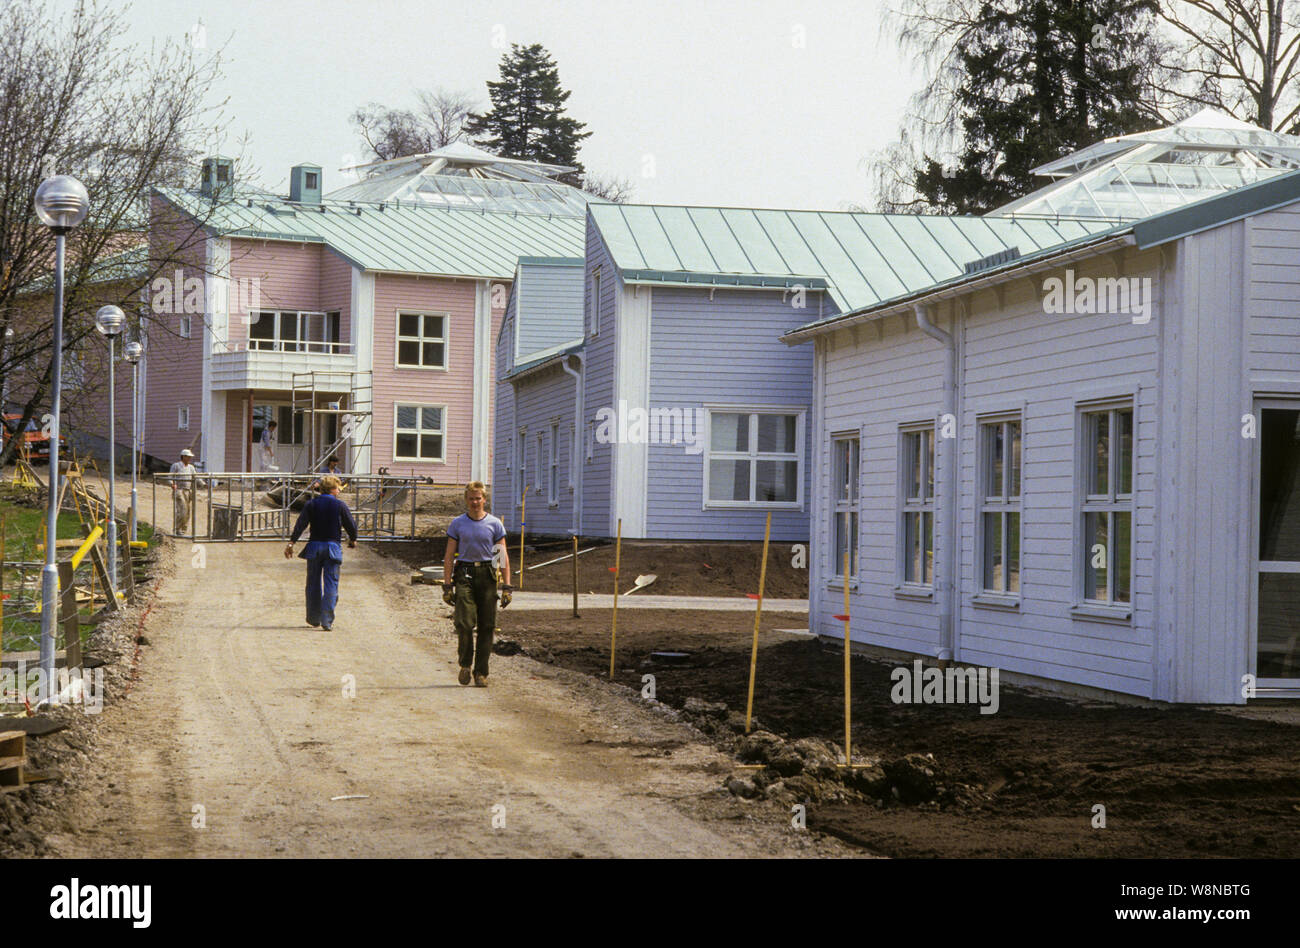 PRODUCTION OF HOUSING in different accommodations in Upplands Väsby Stock Photo